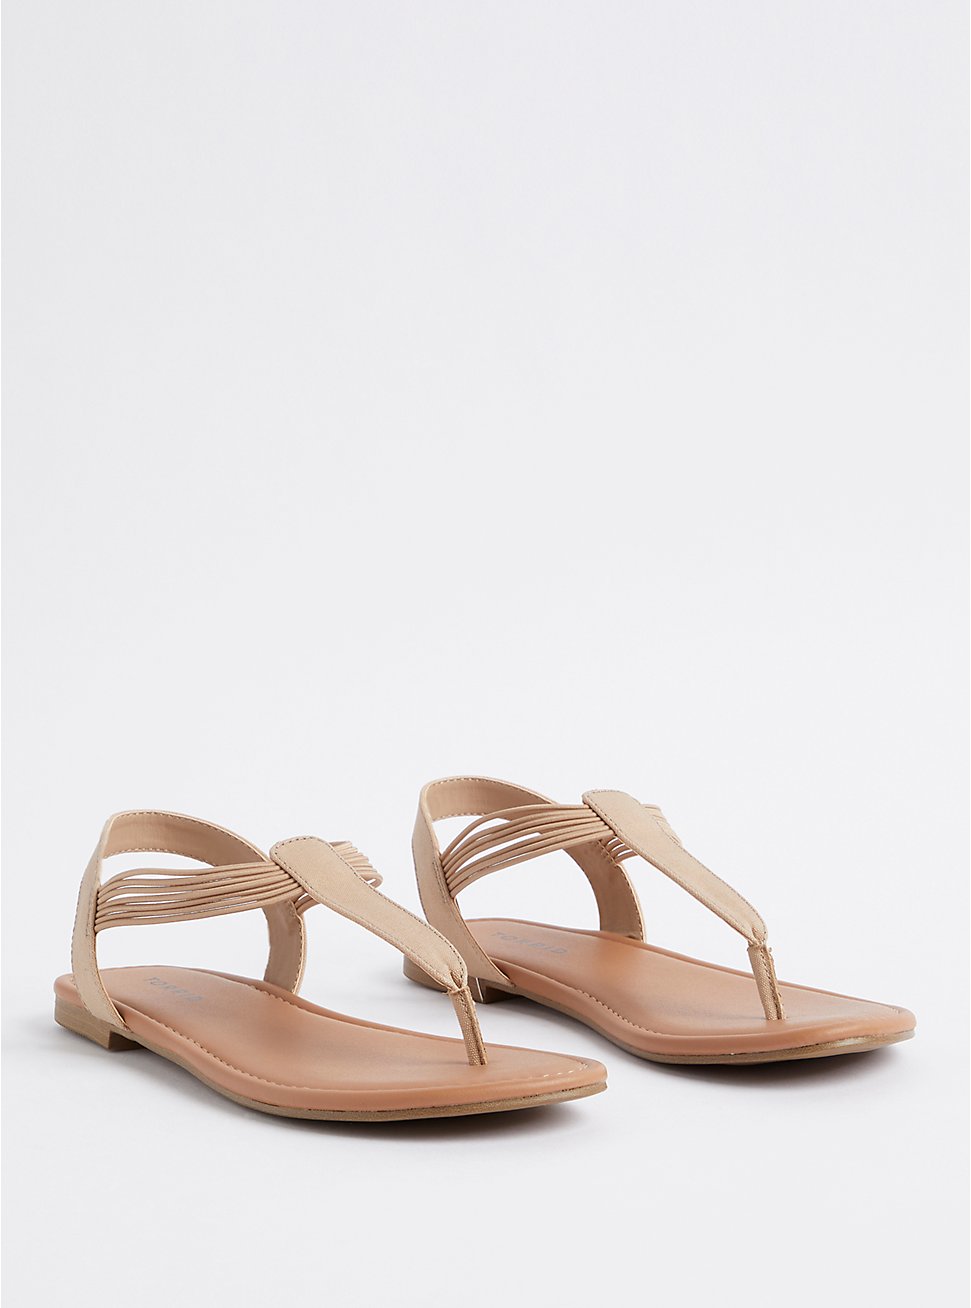 Plus Size T-Strap Sandal - Stretch Canvas Taupe (WW), TAUPE, hi-res